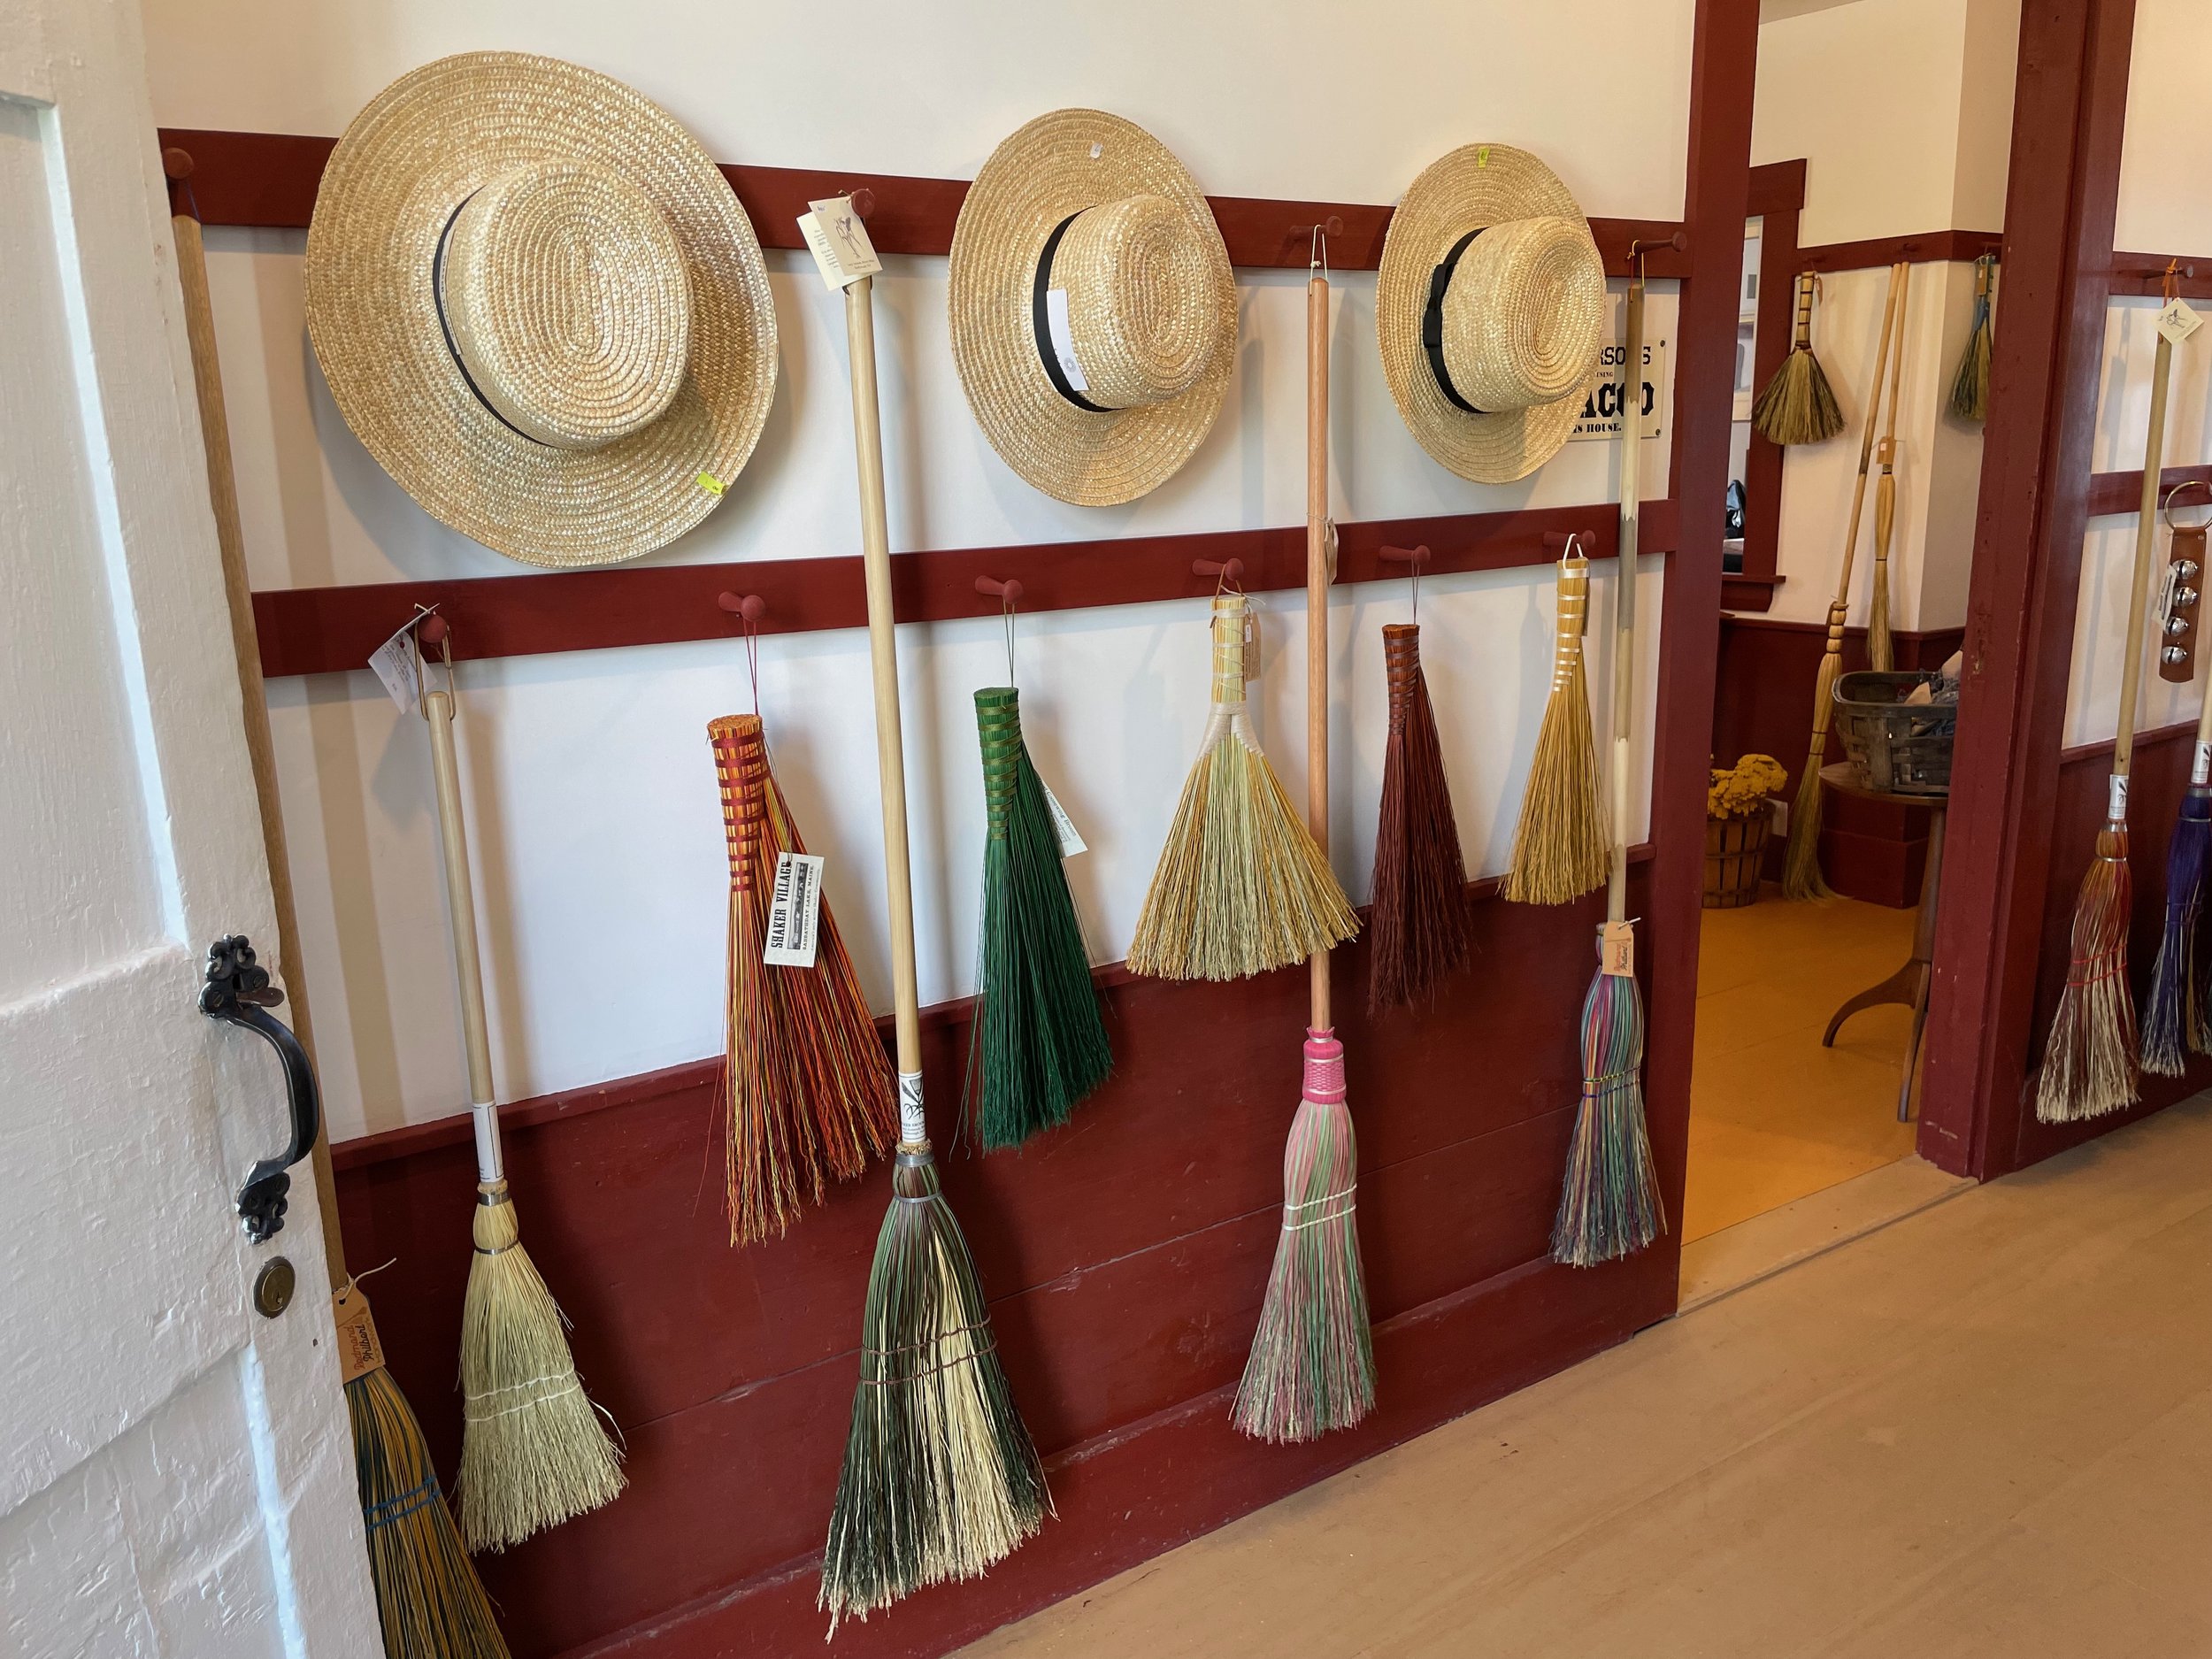   Lovely display of hats and brooms at the Shaker Village gift shop.   